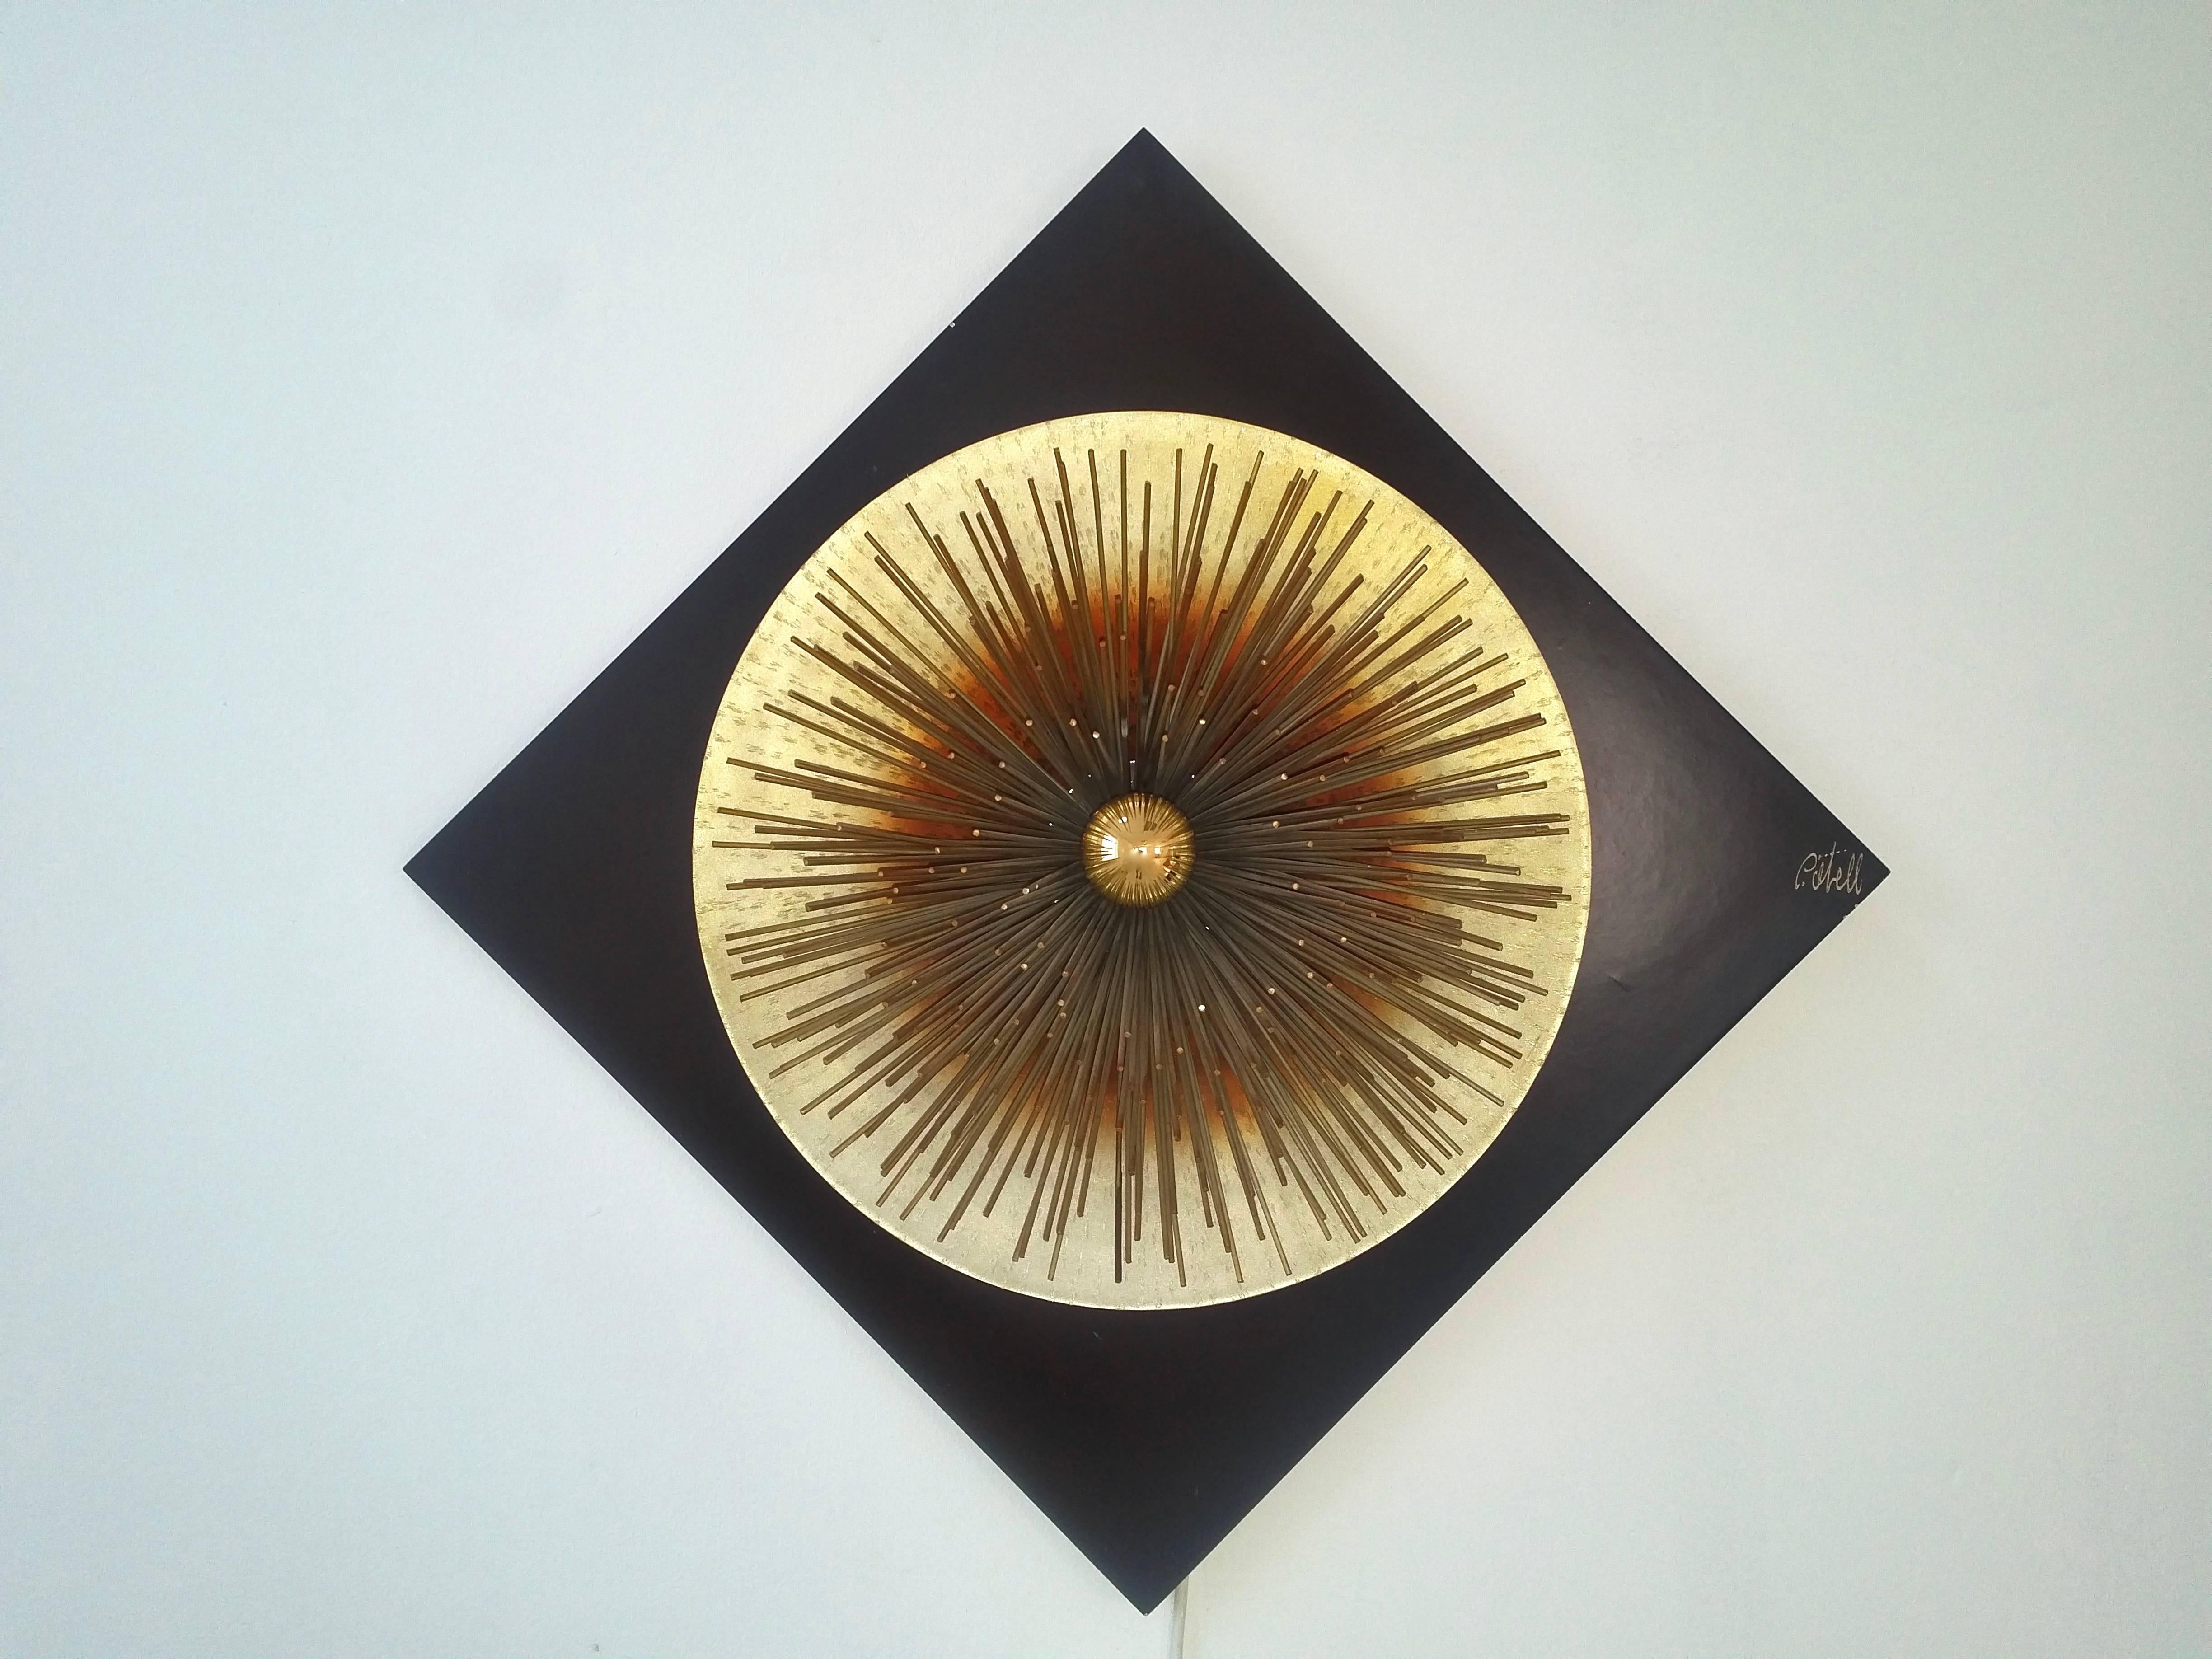 Brass and Metal 'Aurora' Light Sculpture by Otello Ciullini In Good Condition For Sale In Hem, NL